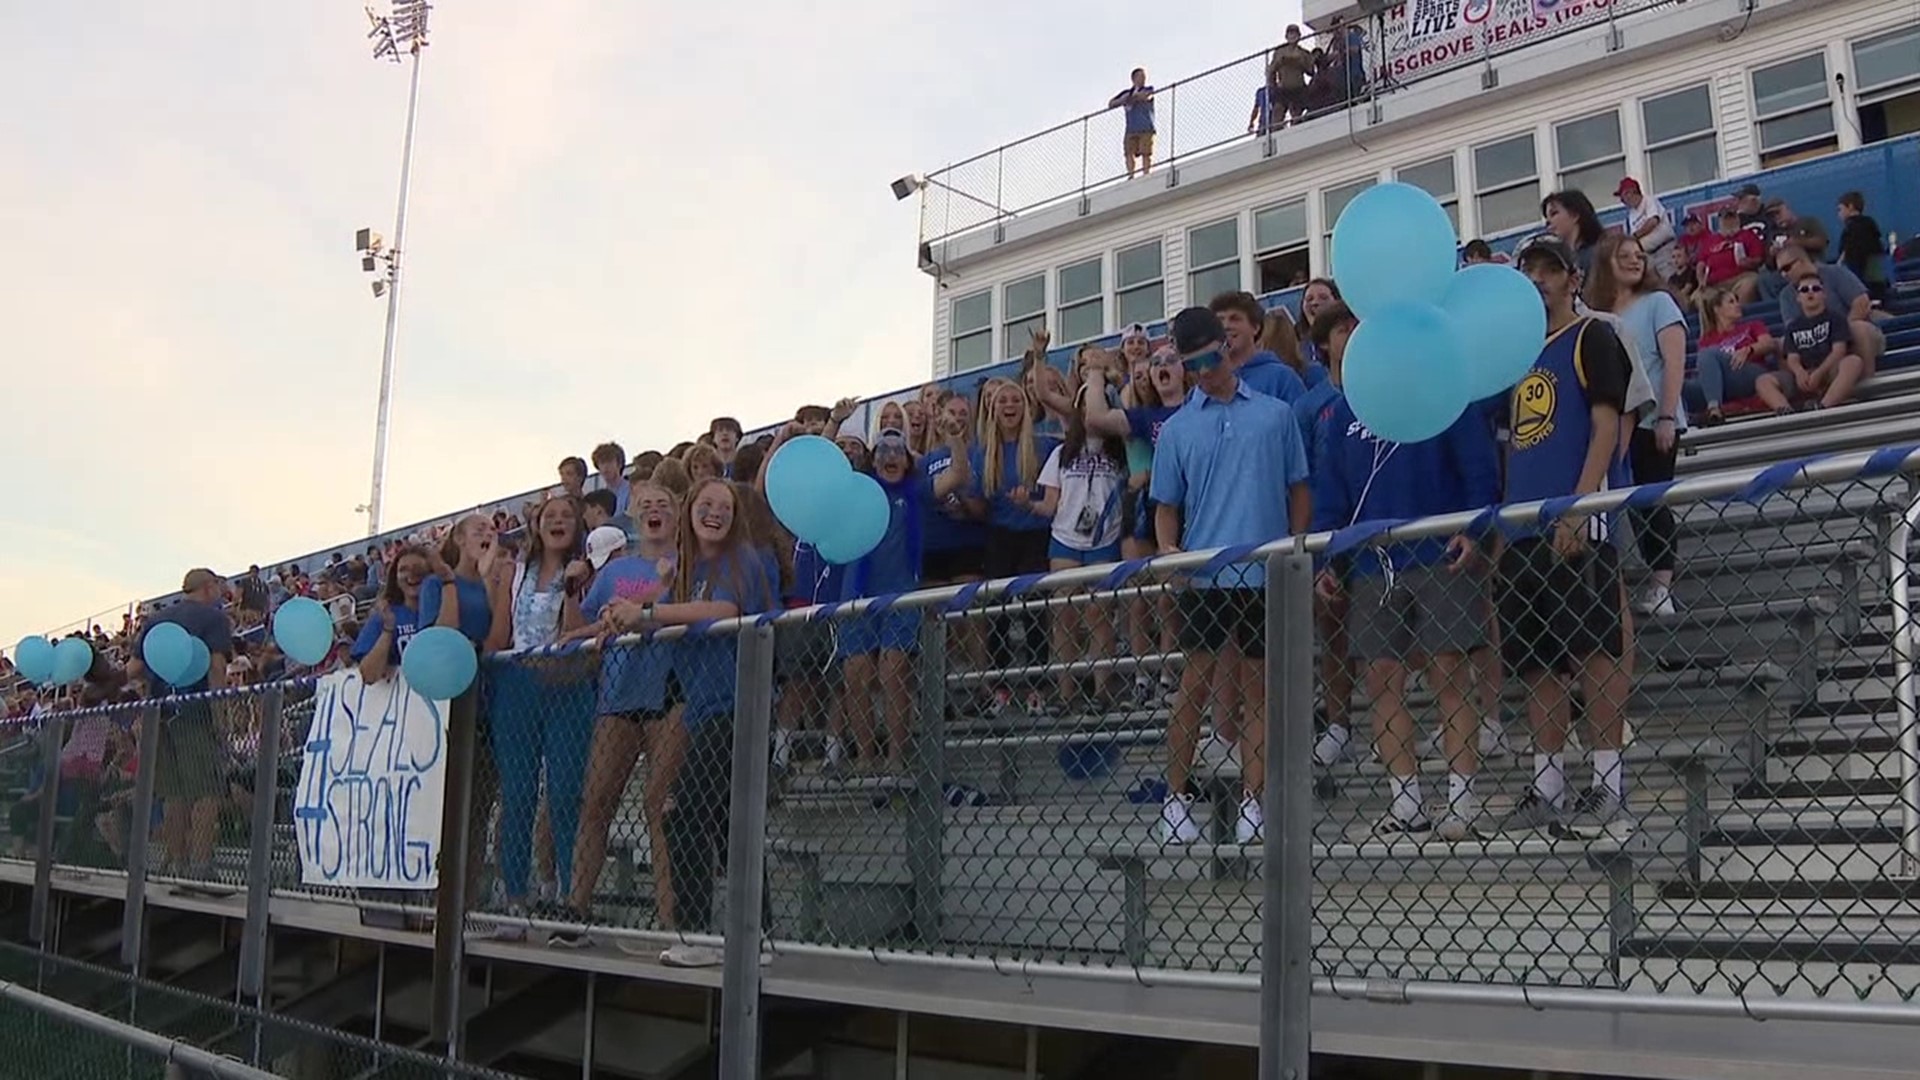 A similar effort to honor a student in Luzerne County took place in Snyder County Friday night.